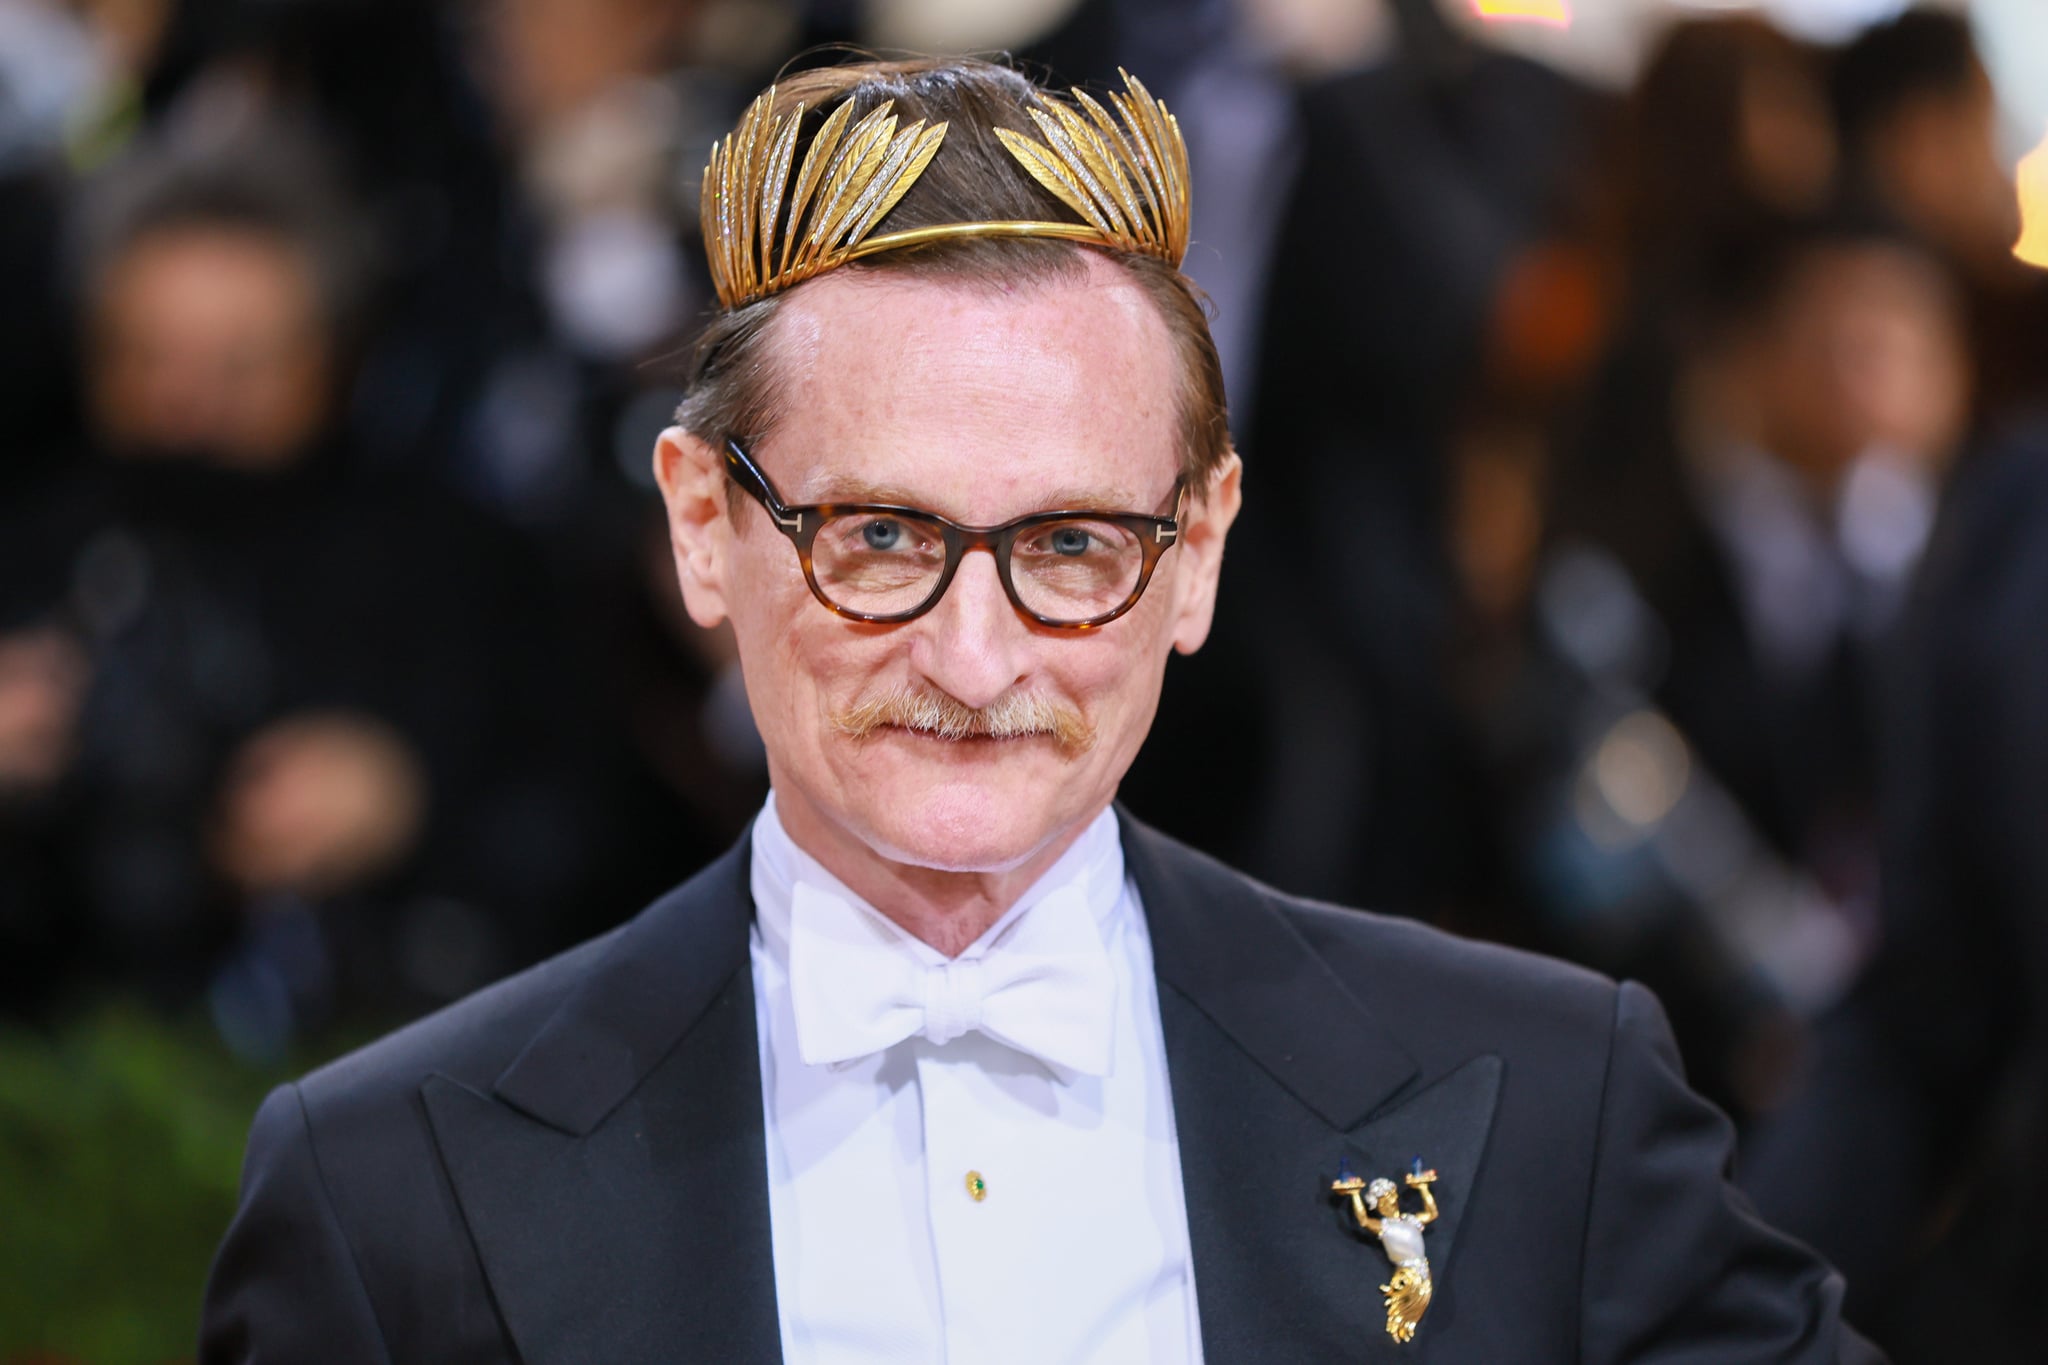 Hamish Bowles Wearing a Tiara at the Met Gala 2022 | Tiaras Are All Over  the Met Gala Red Carpet | POPSUGAR Beauty Photo 6